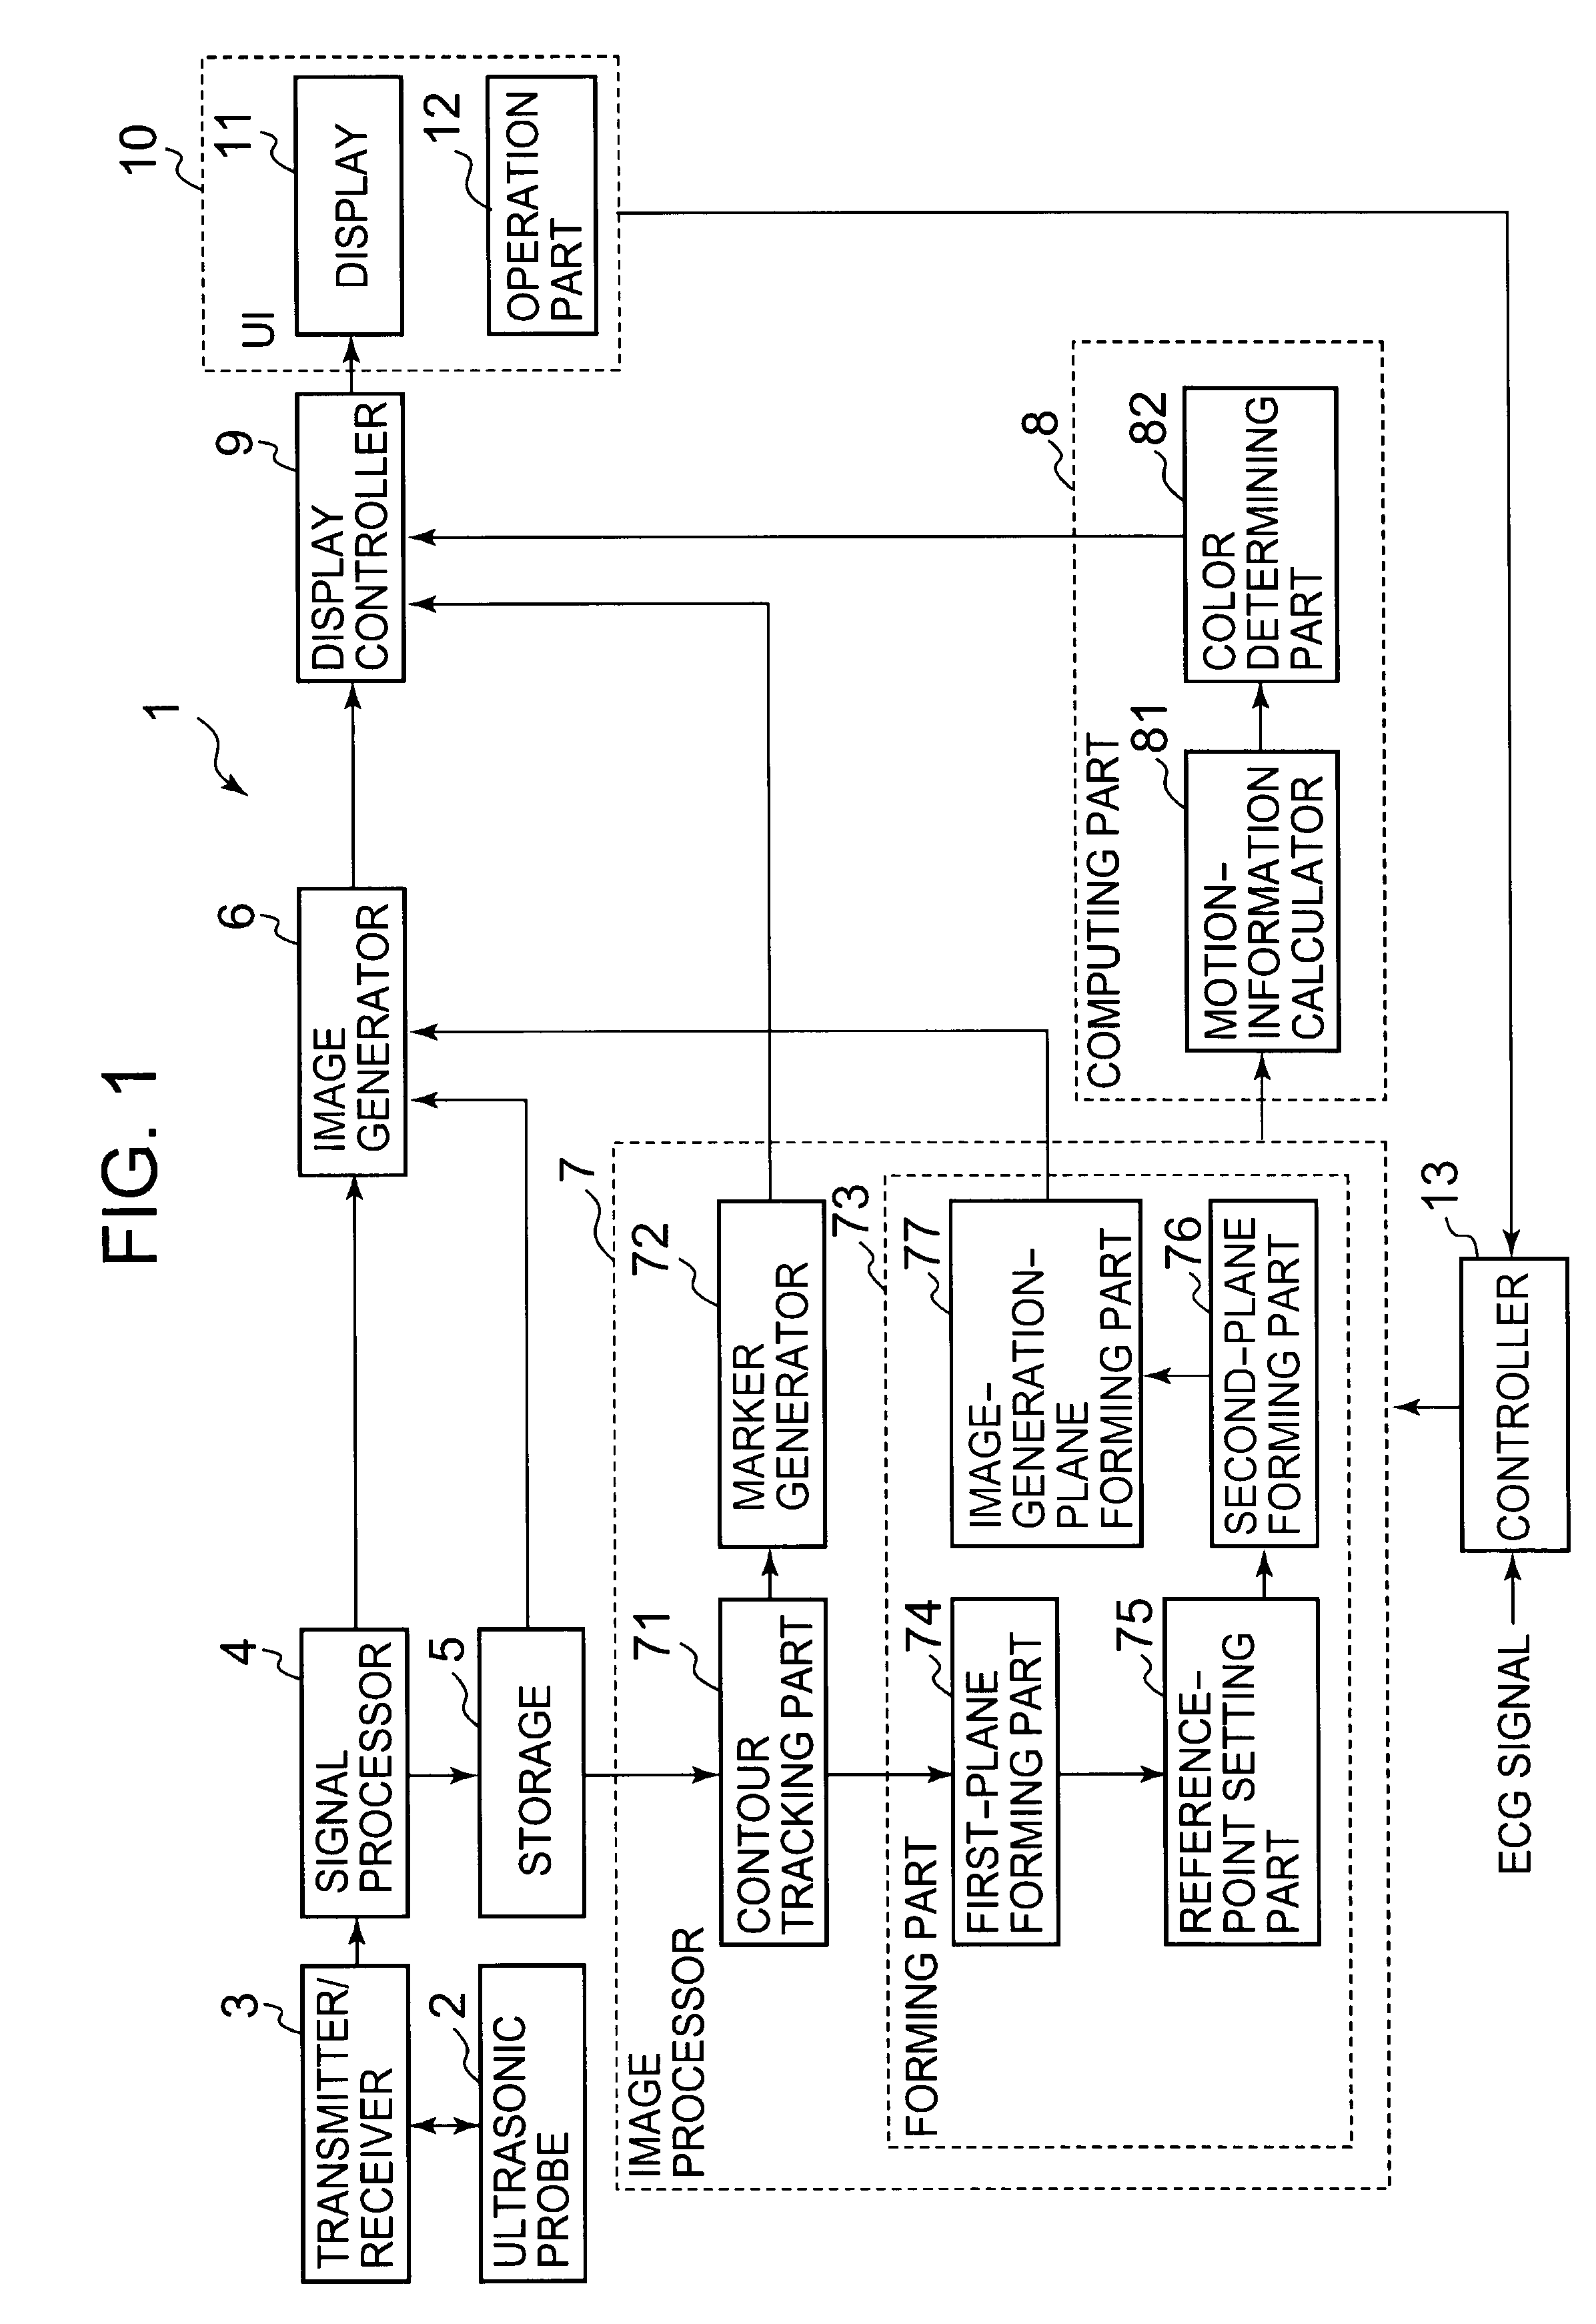 Ultrasonic image processing apparatus and a method for processing an ultrasonic image